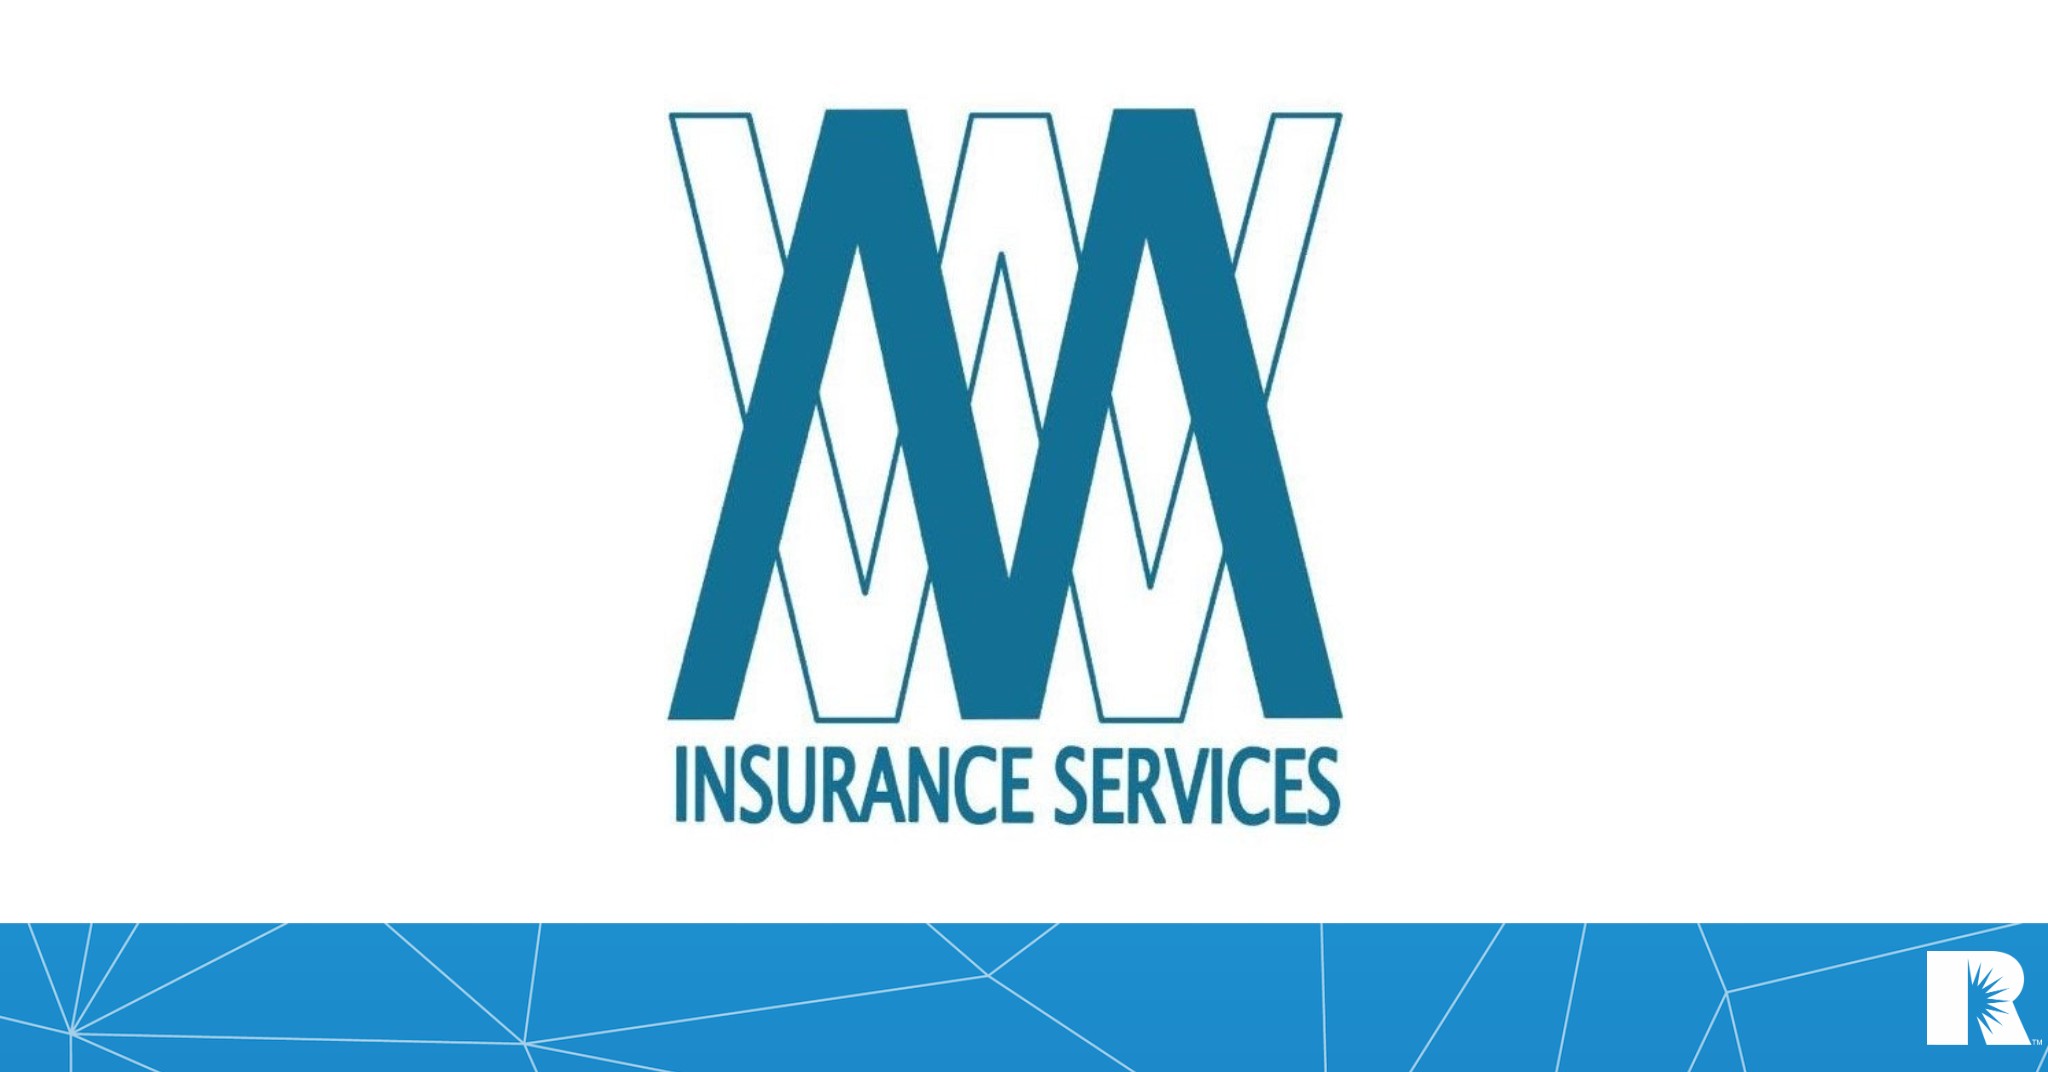 The business logo for Wise Men Insurance Services.